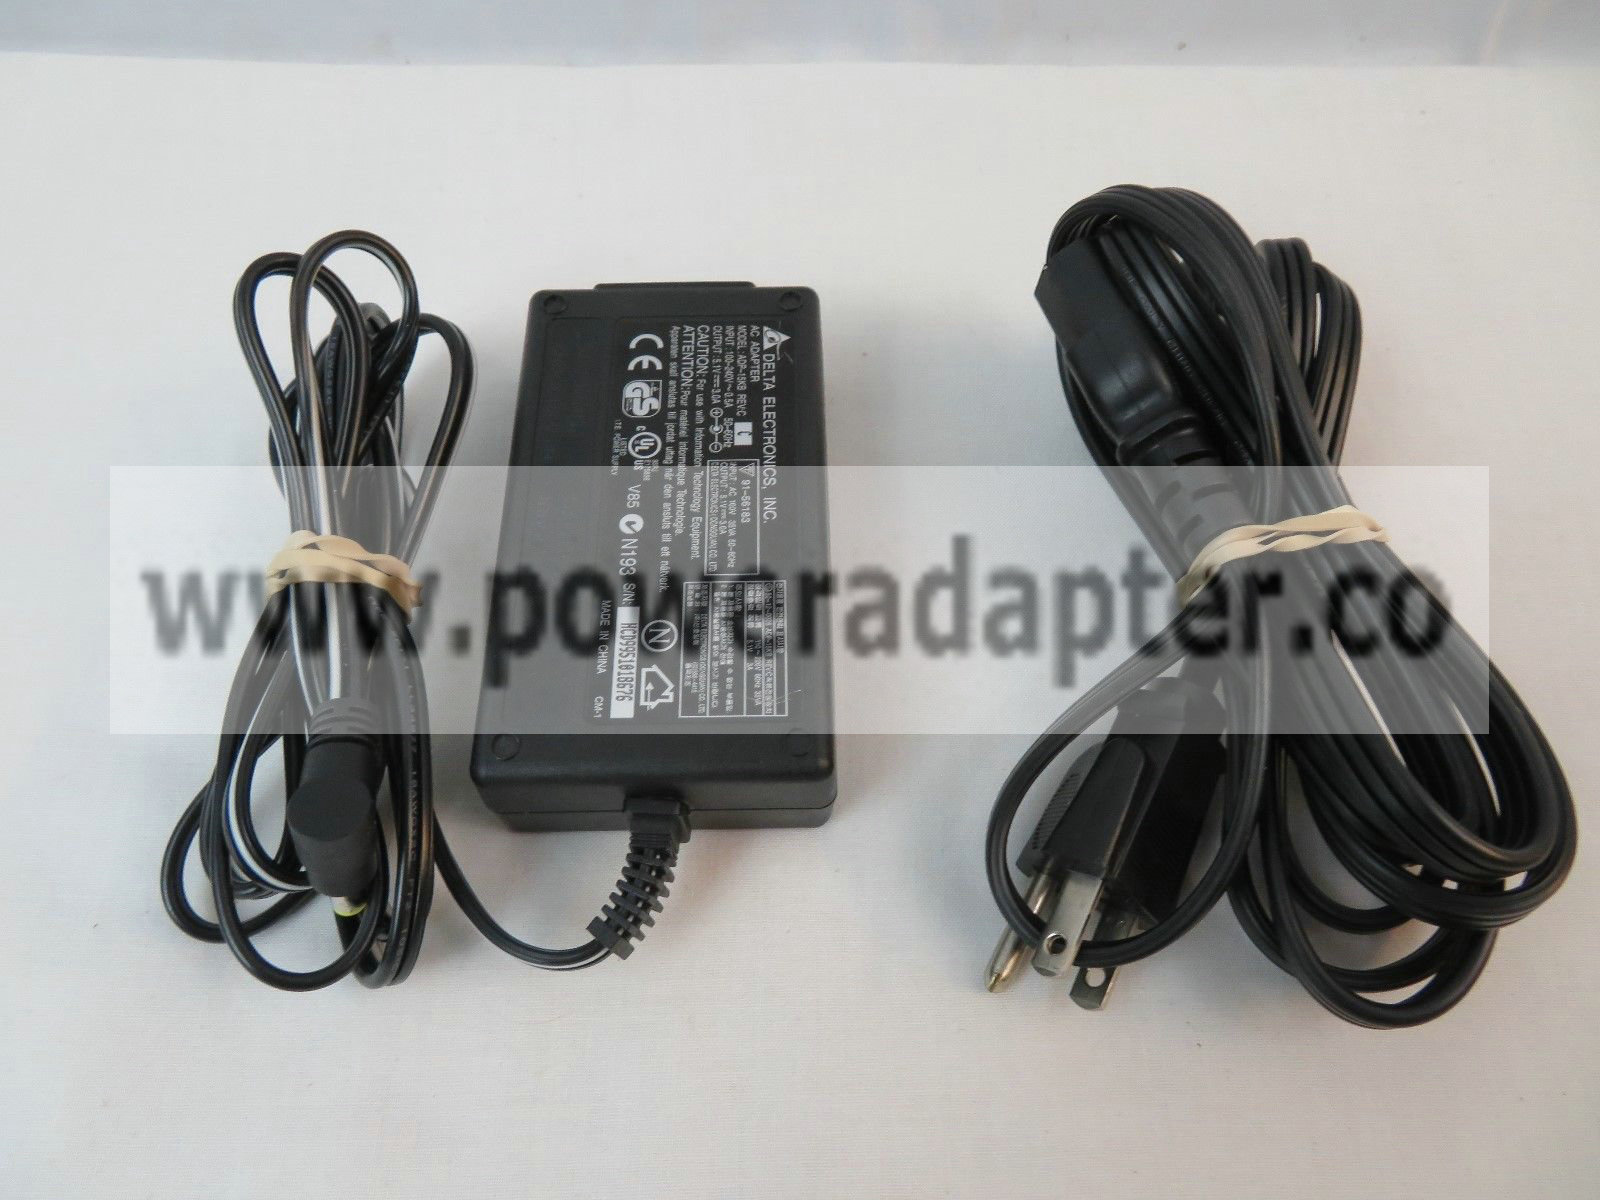 DELTA Electronics WLAN Power Supply ADP-15KB rev. C 5.1V DC 3A AC ADAPTER Brand: DELTA Electronics Model no: ADP-1 - Click Image to Close